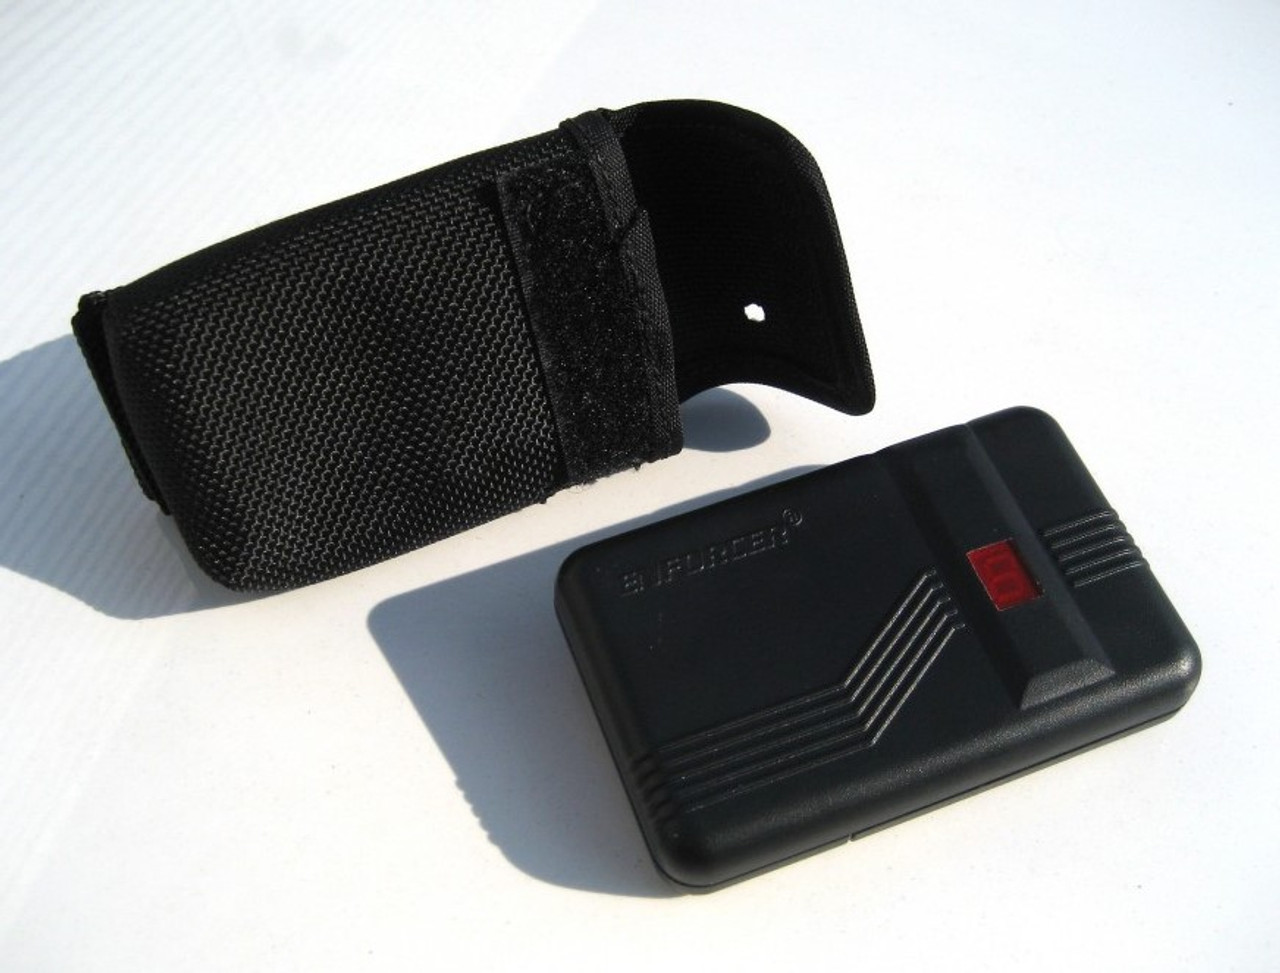 Ace K9 Heat Alarm Pager Option